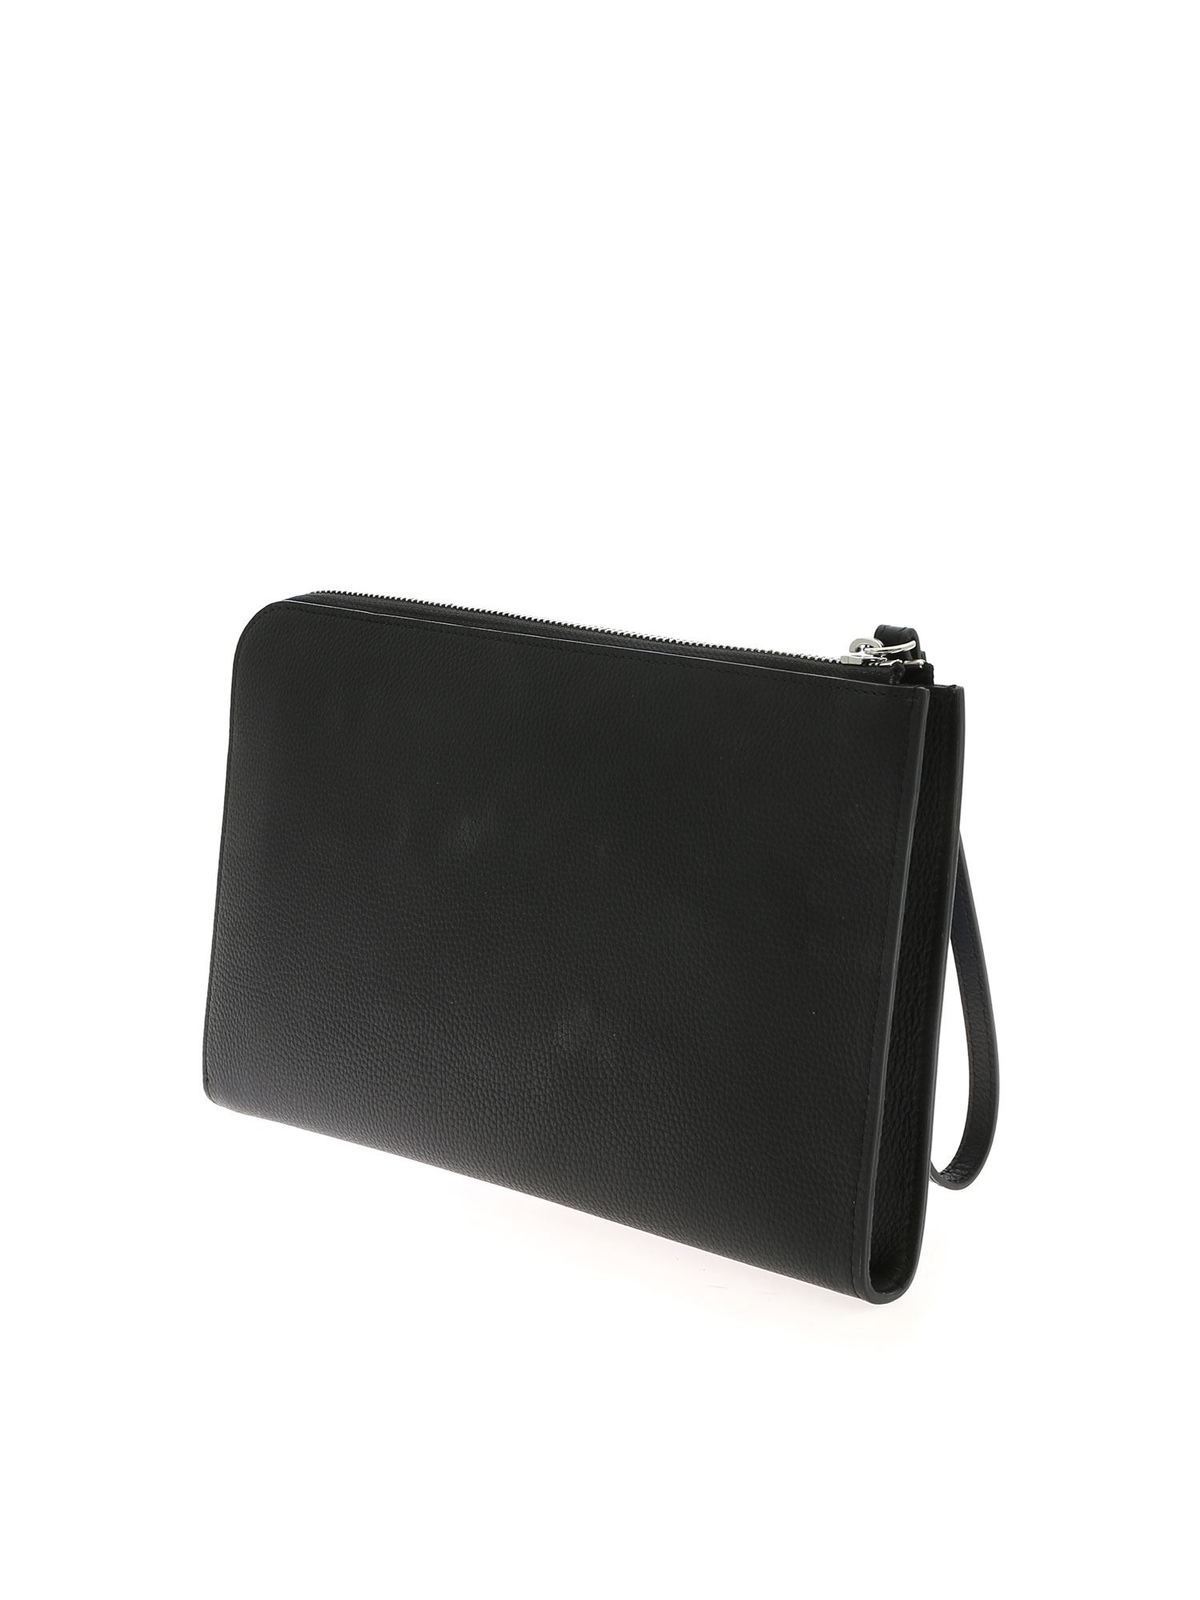 Clutches Dsquared2 - ICON logo clutch bag in black - POW002425103905M063